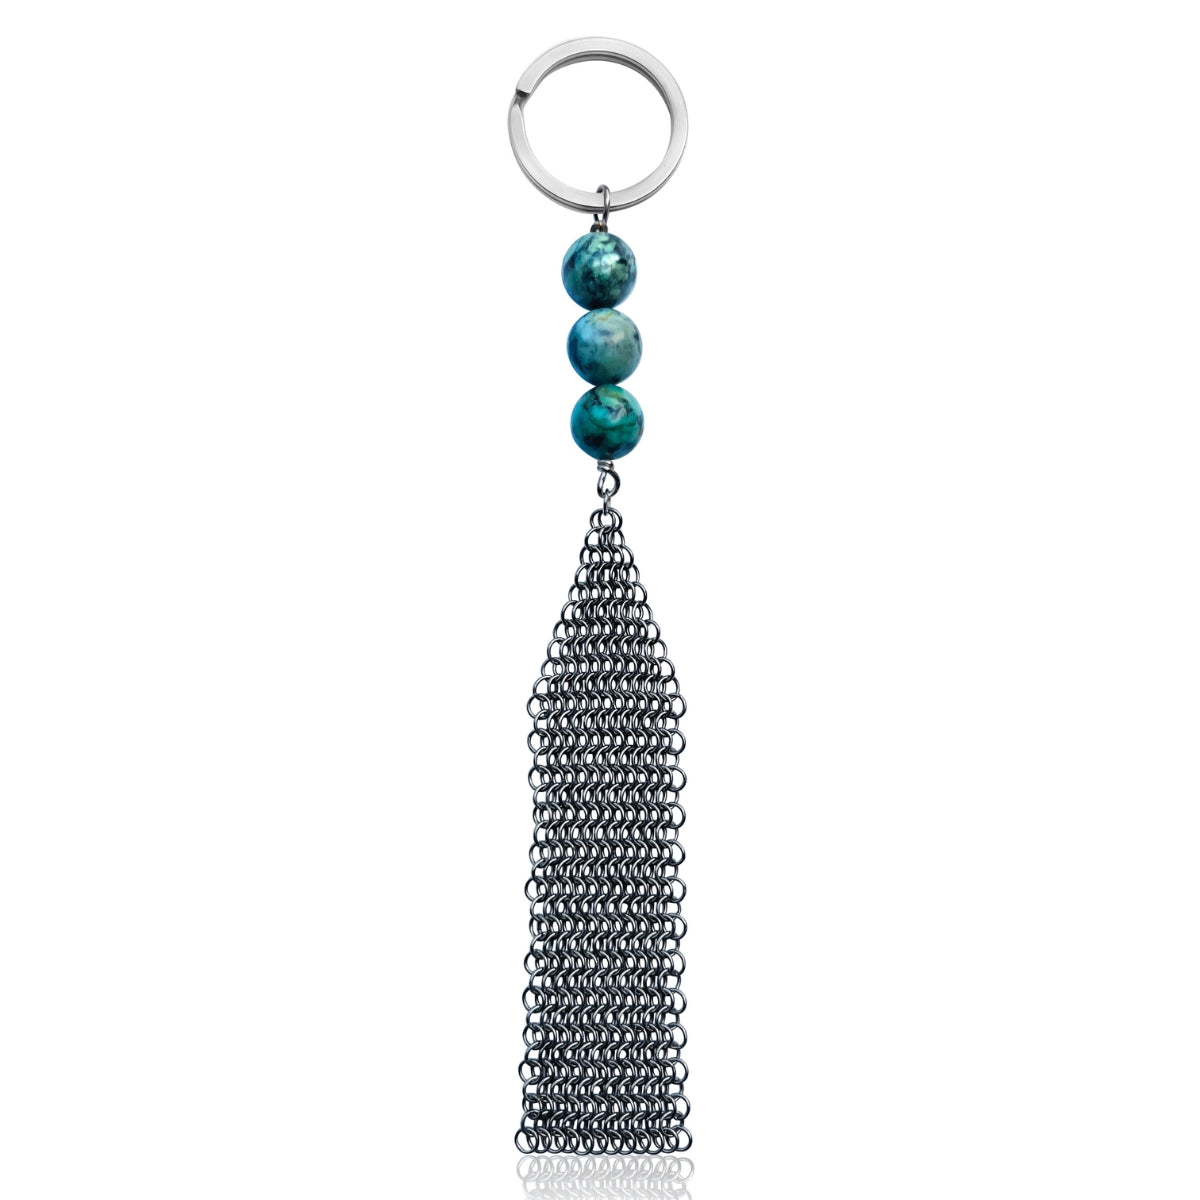 Neptunic SharkSuit Keychain with Turquoise - Sustainable Fashion for Ocean Lovers. Turquoise is believed to bring luck. Stainless Steel Chainmail connects to beautiful gemstone beads. This unisex keychain is  constructed with unused pieces of Stainless Steel Mesh from Neptunic SharkSuits. 